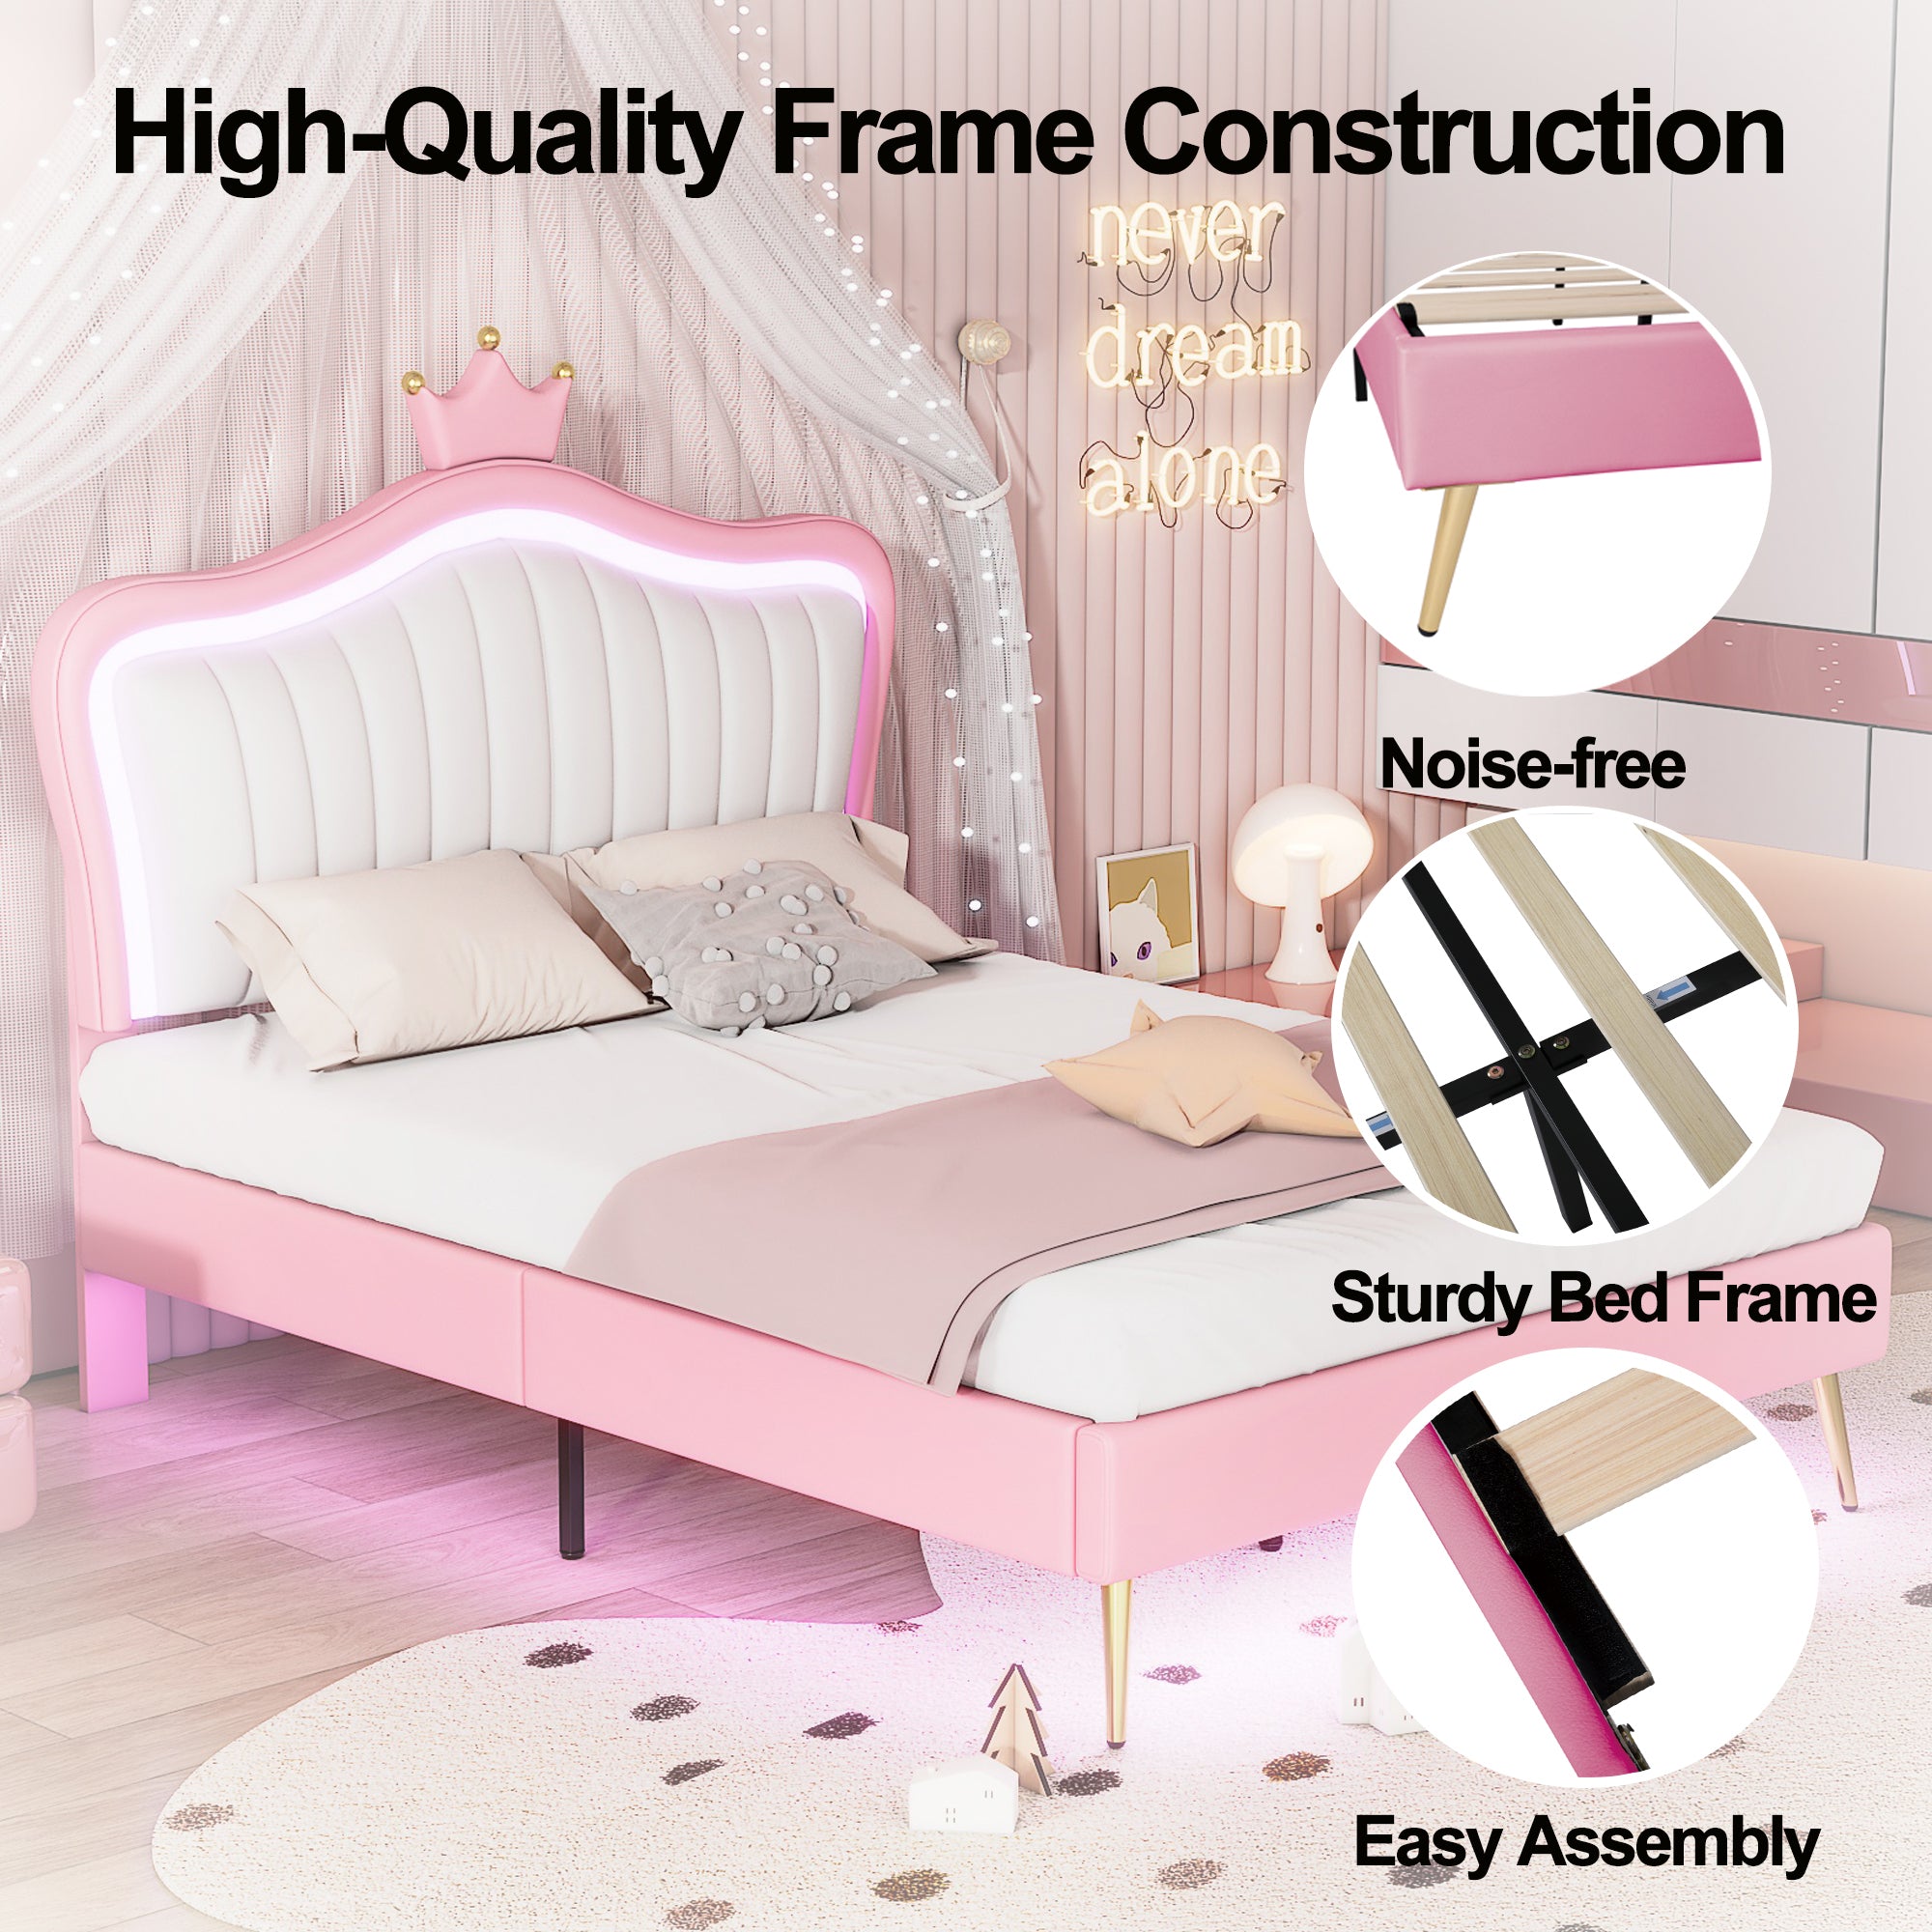 Sofia Pink and White Faux Leather Full Size Platform Bed with Crown and LED Light